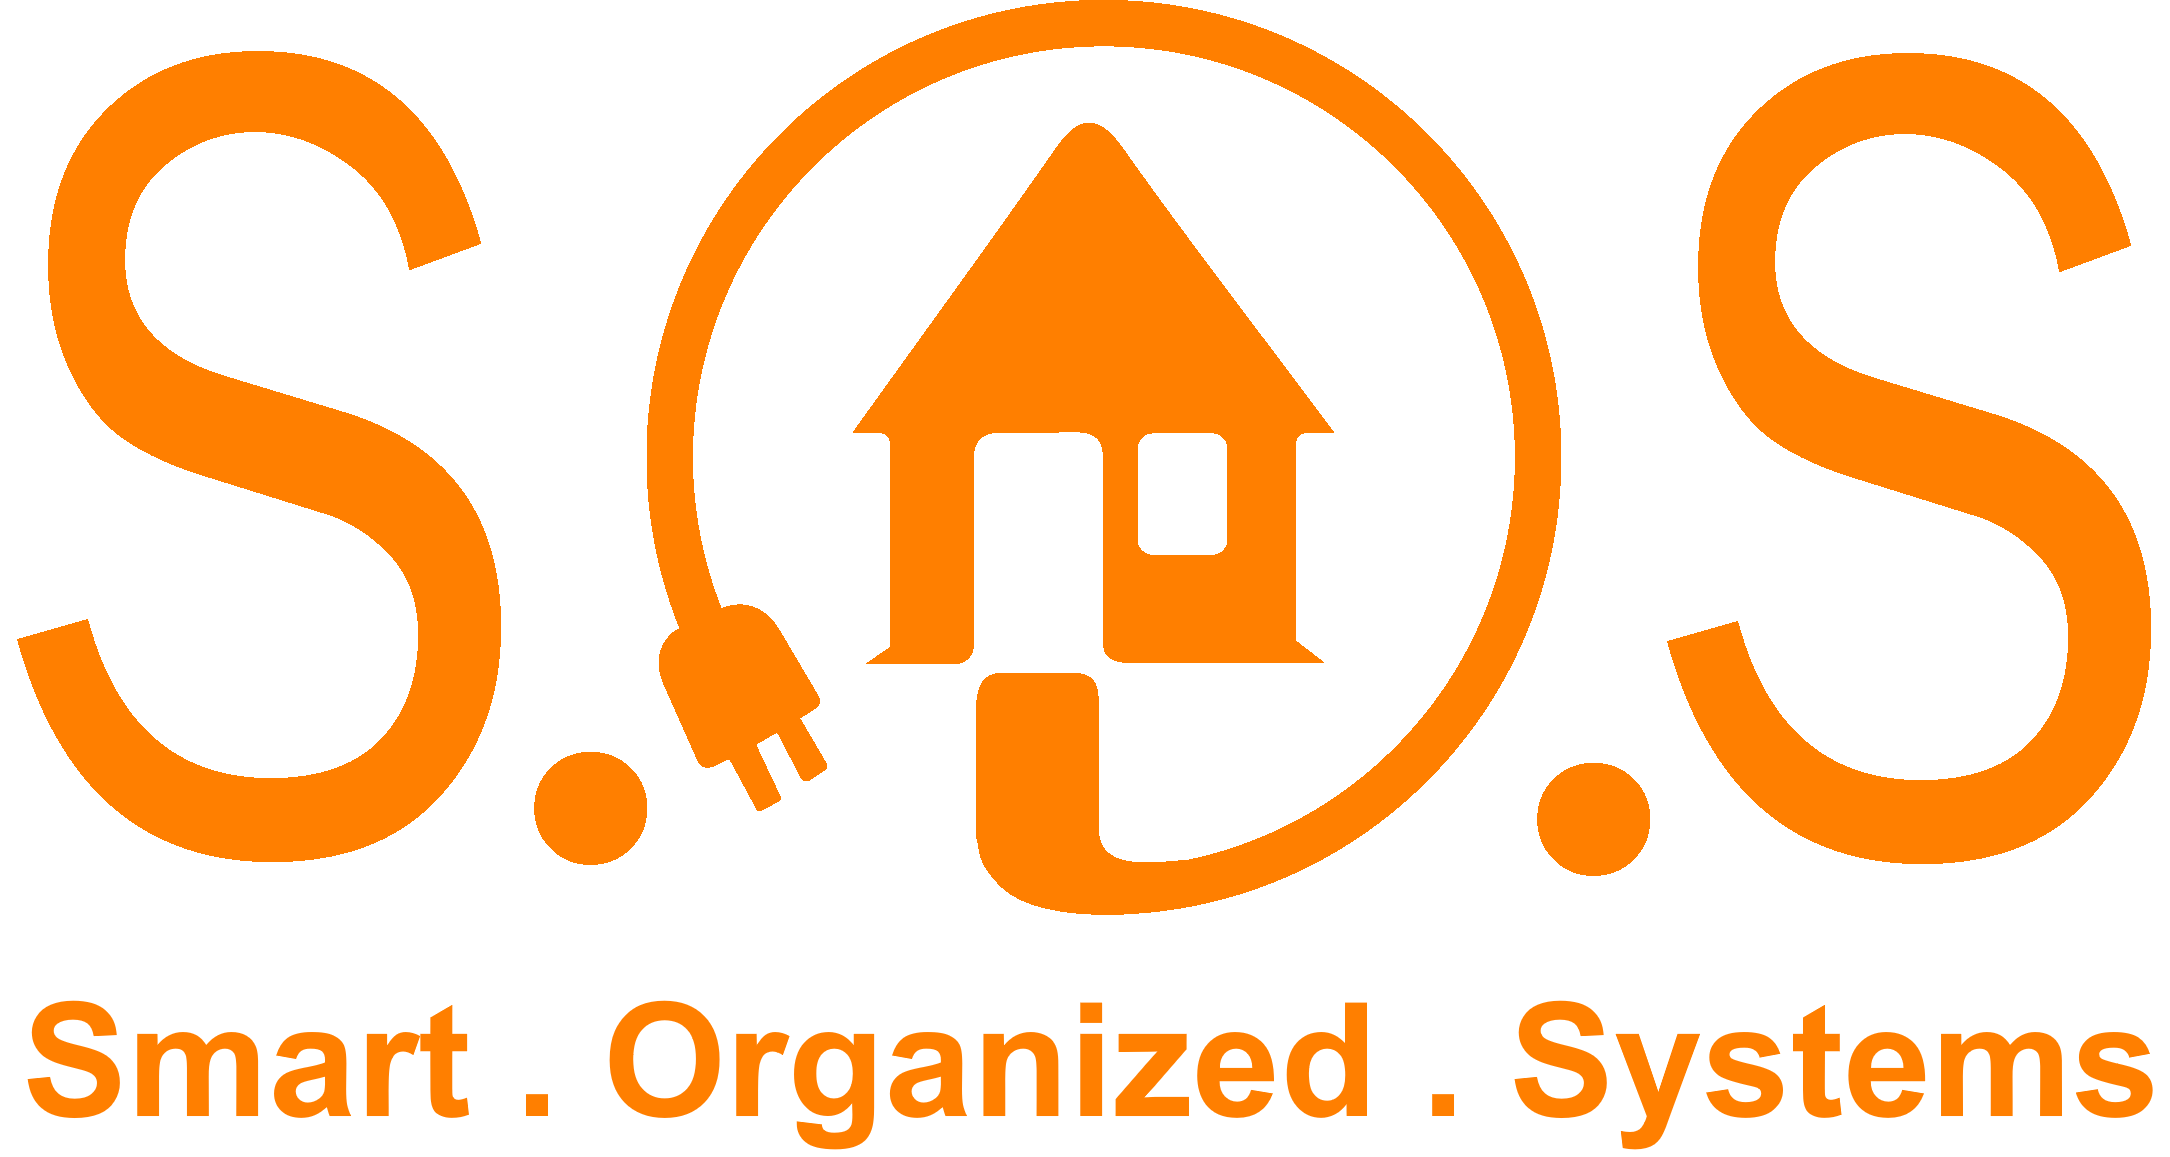 S.O.S (Smart Organized Systems)